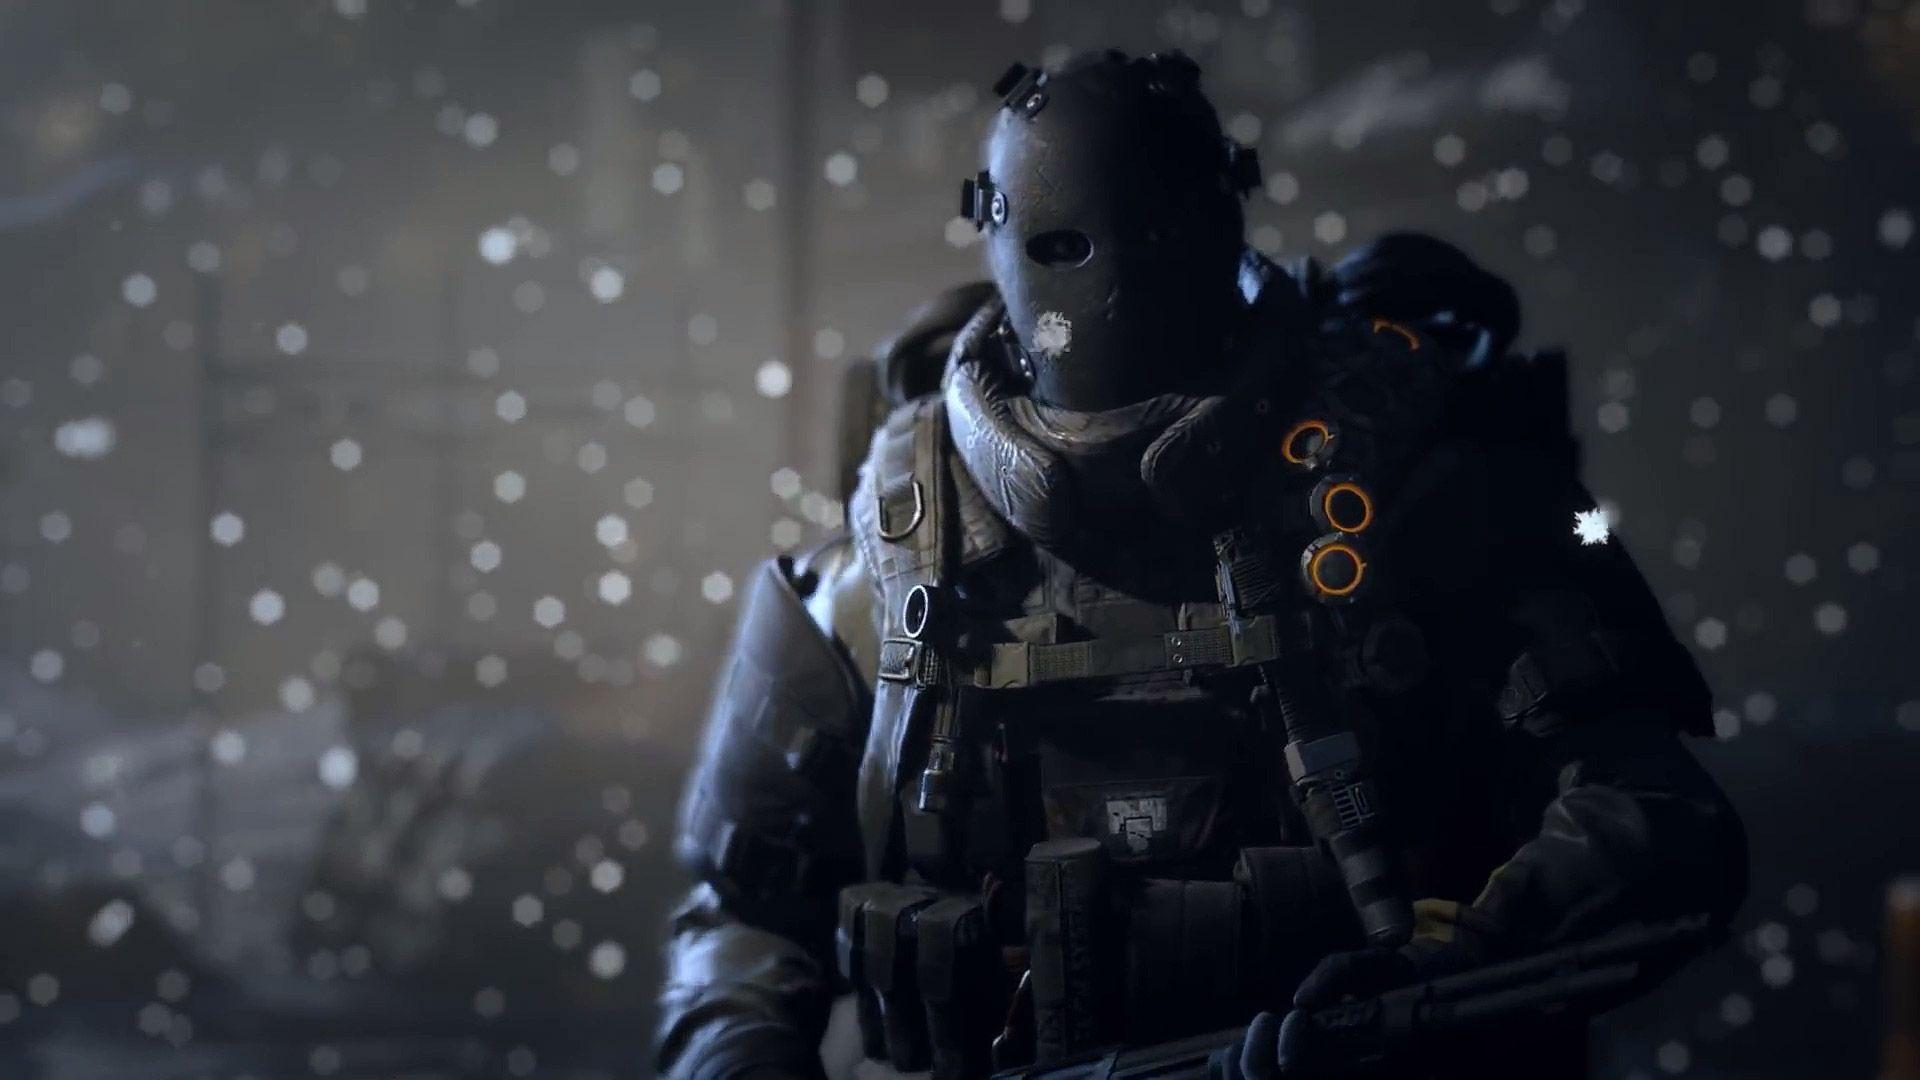 The Division Faction Logo - Survival DLC New Faction Name/Appearance Confirmed! : thedivision